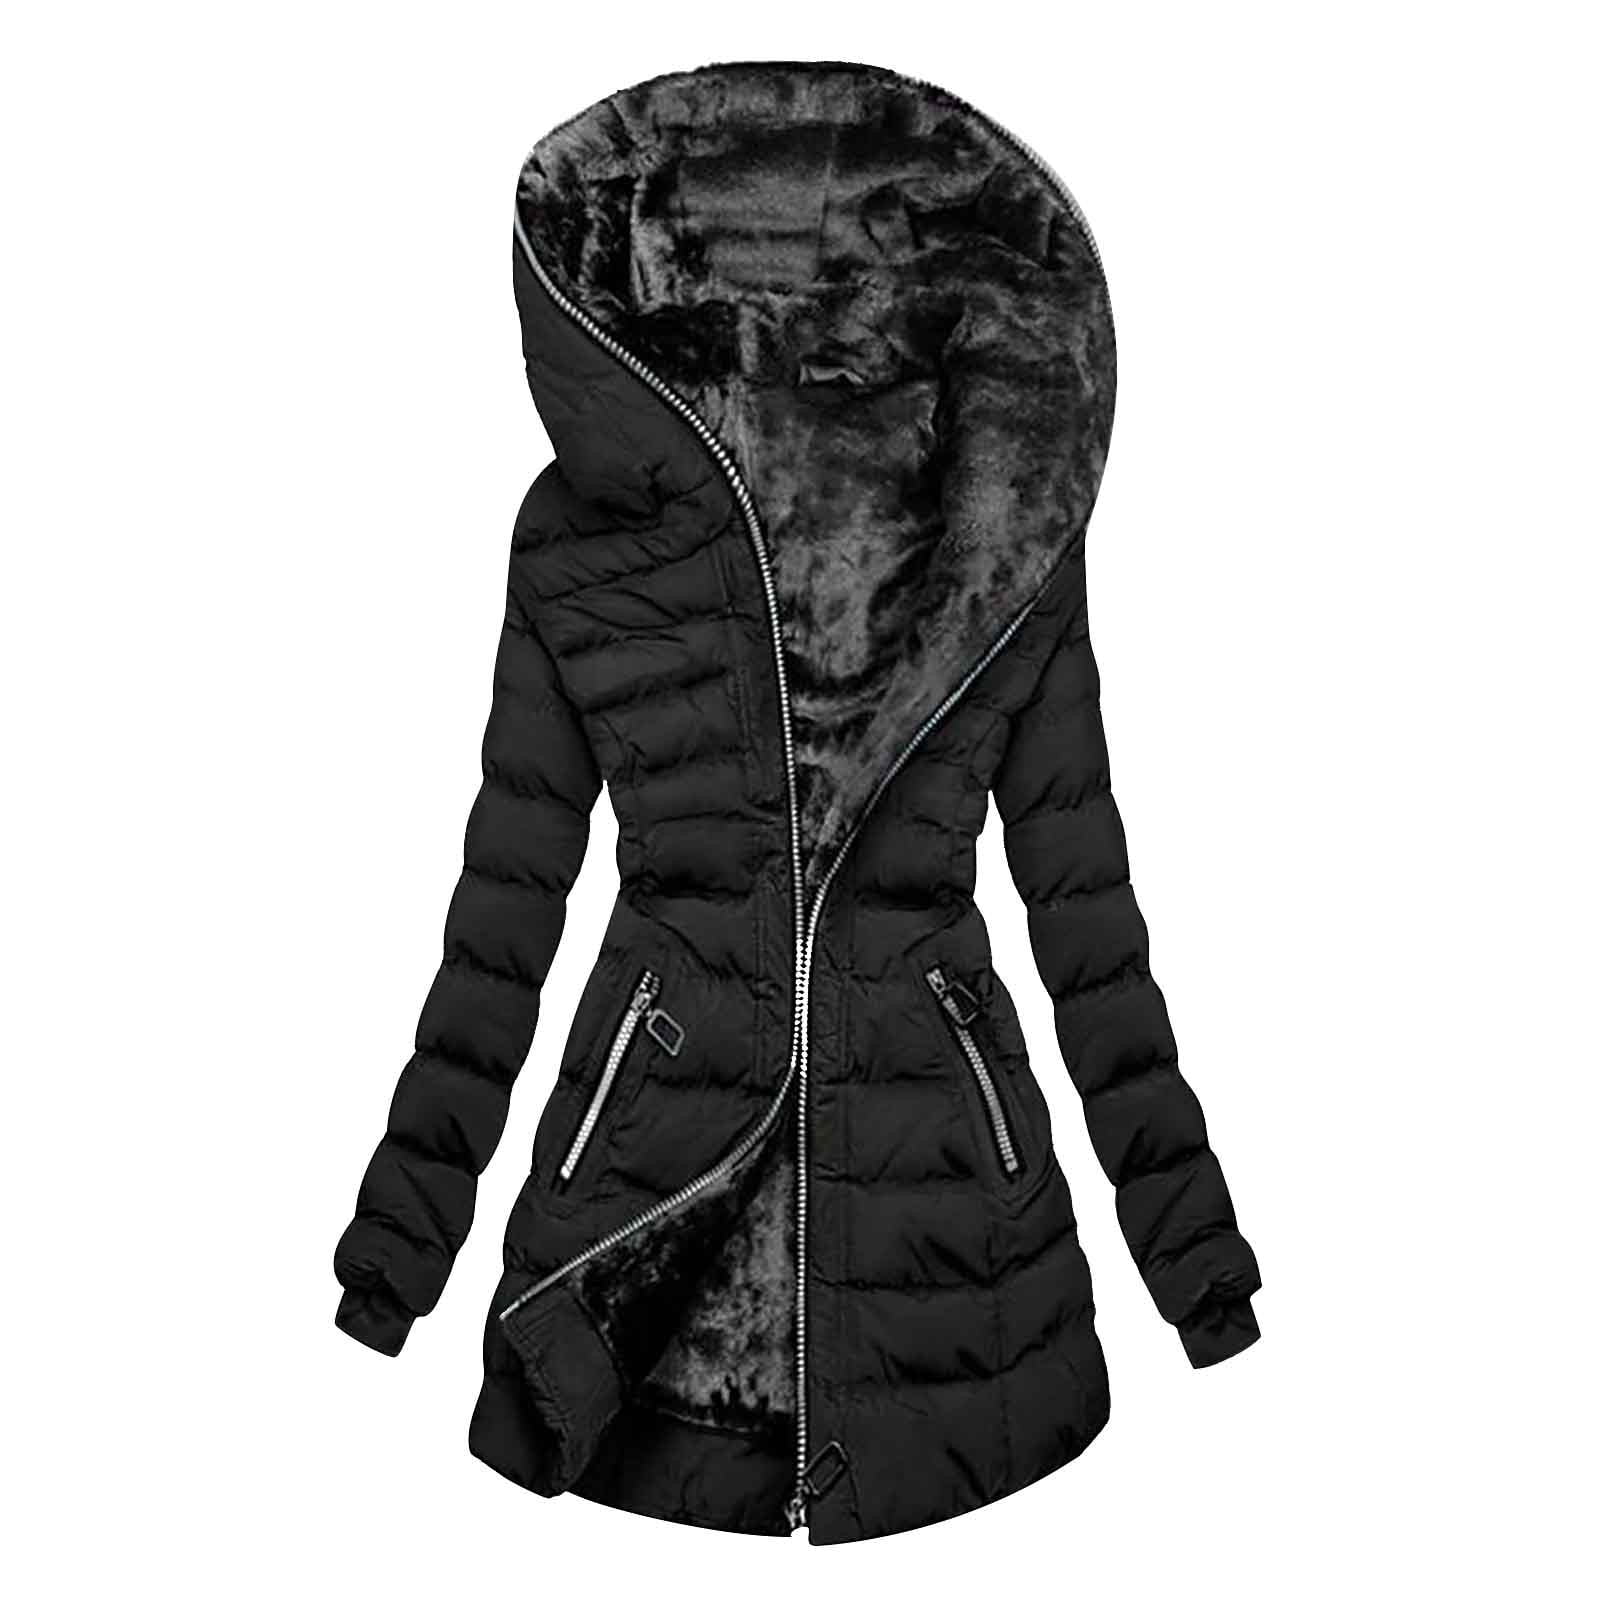 Fall Savings Clearance Deals ! BVnarty Women's Top Down Lammy Jacket  Lightweight Plus Size Solid Color Hooded Neck Long Sleeve Shacket Jacket  Casual Winter Fashion Top for Mujer Black M 